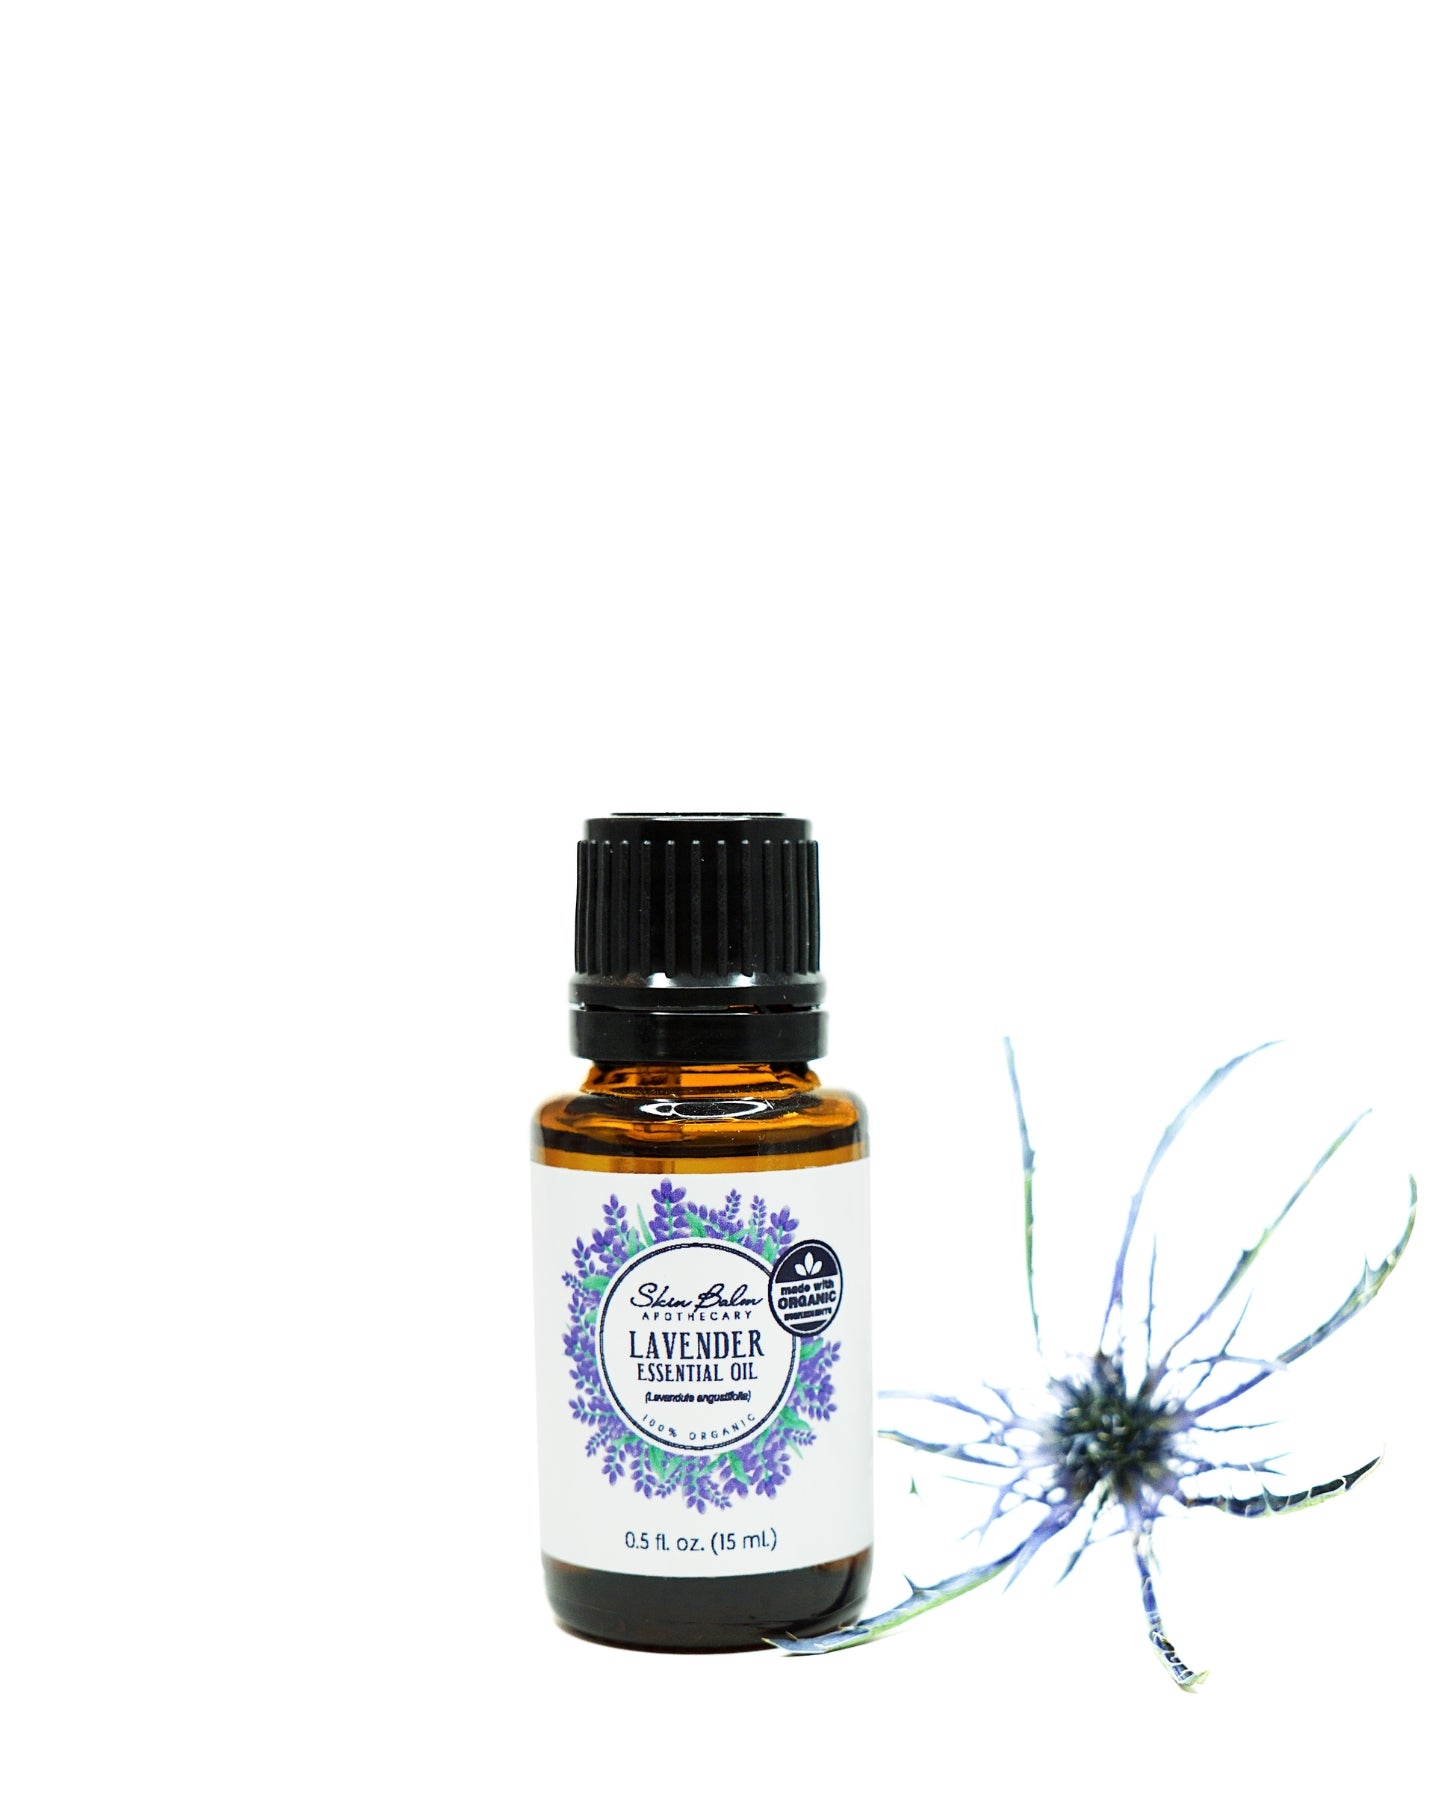 Organic Lavender Essential Oil with purple flower against a white background.